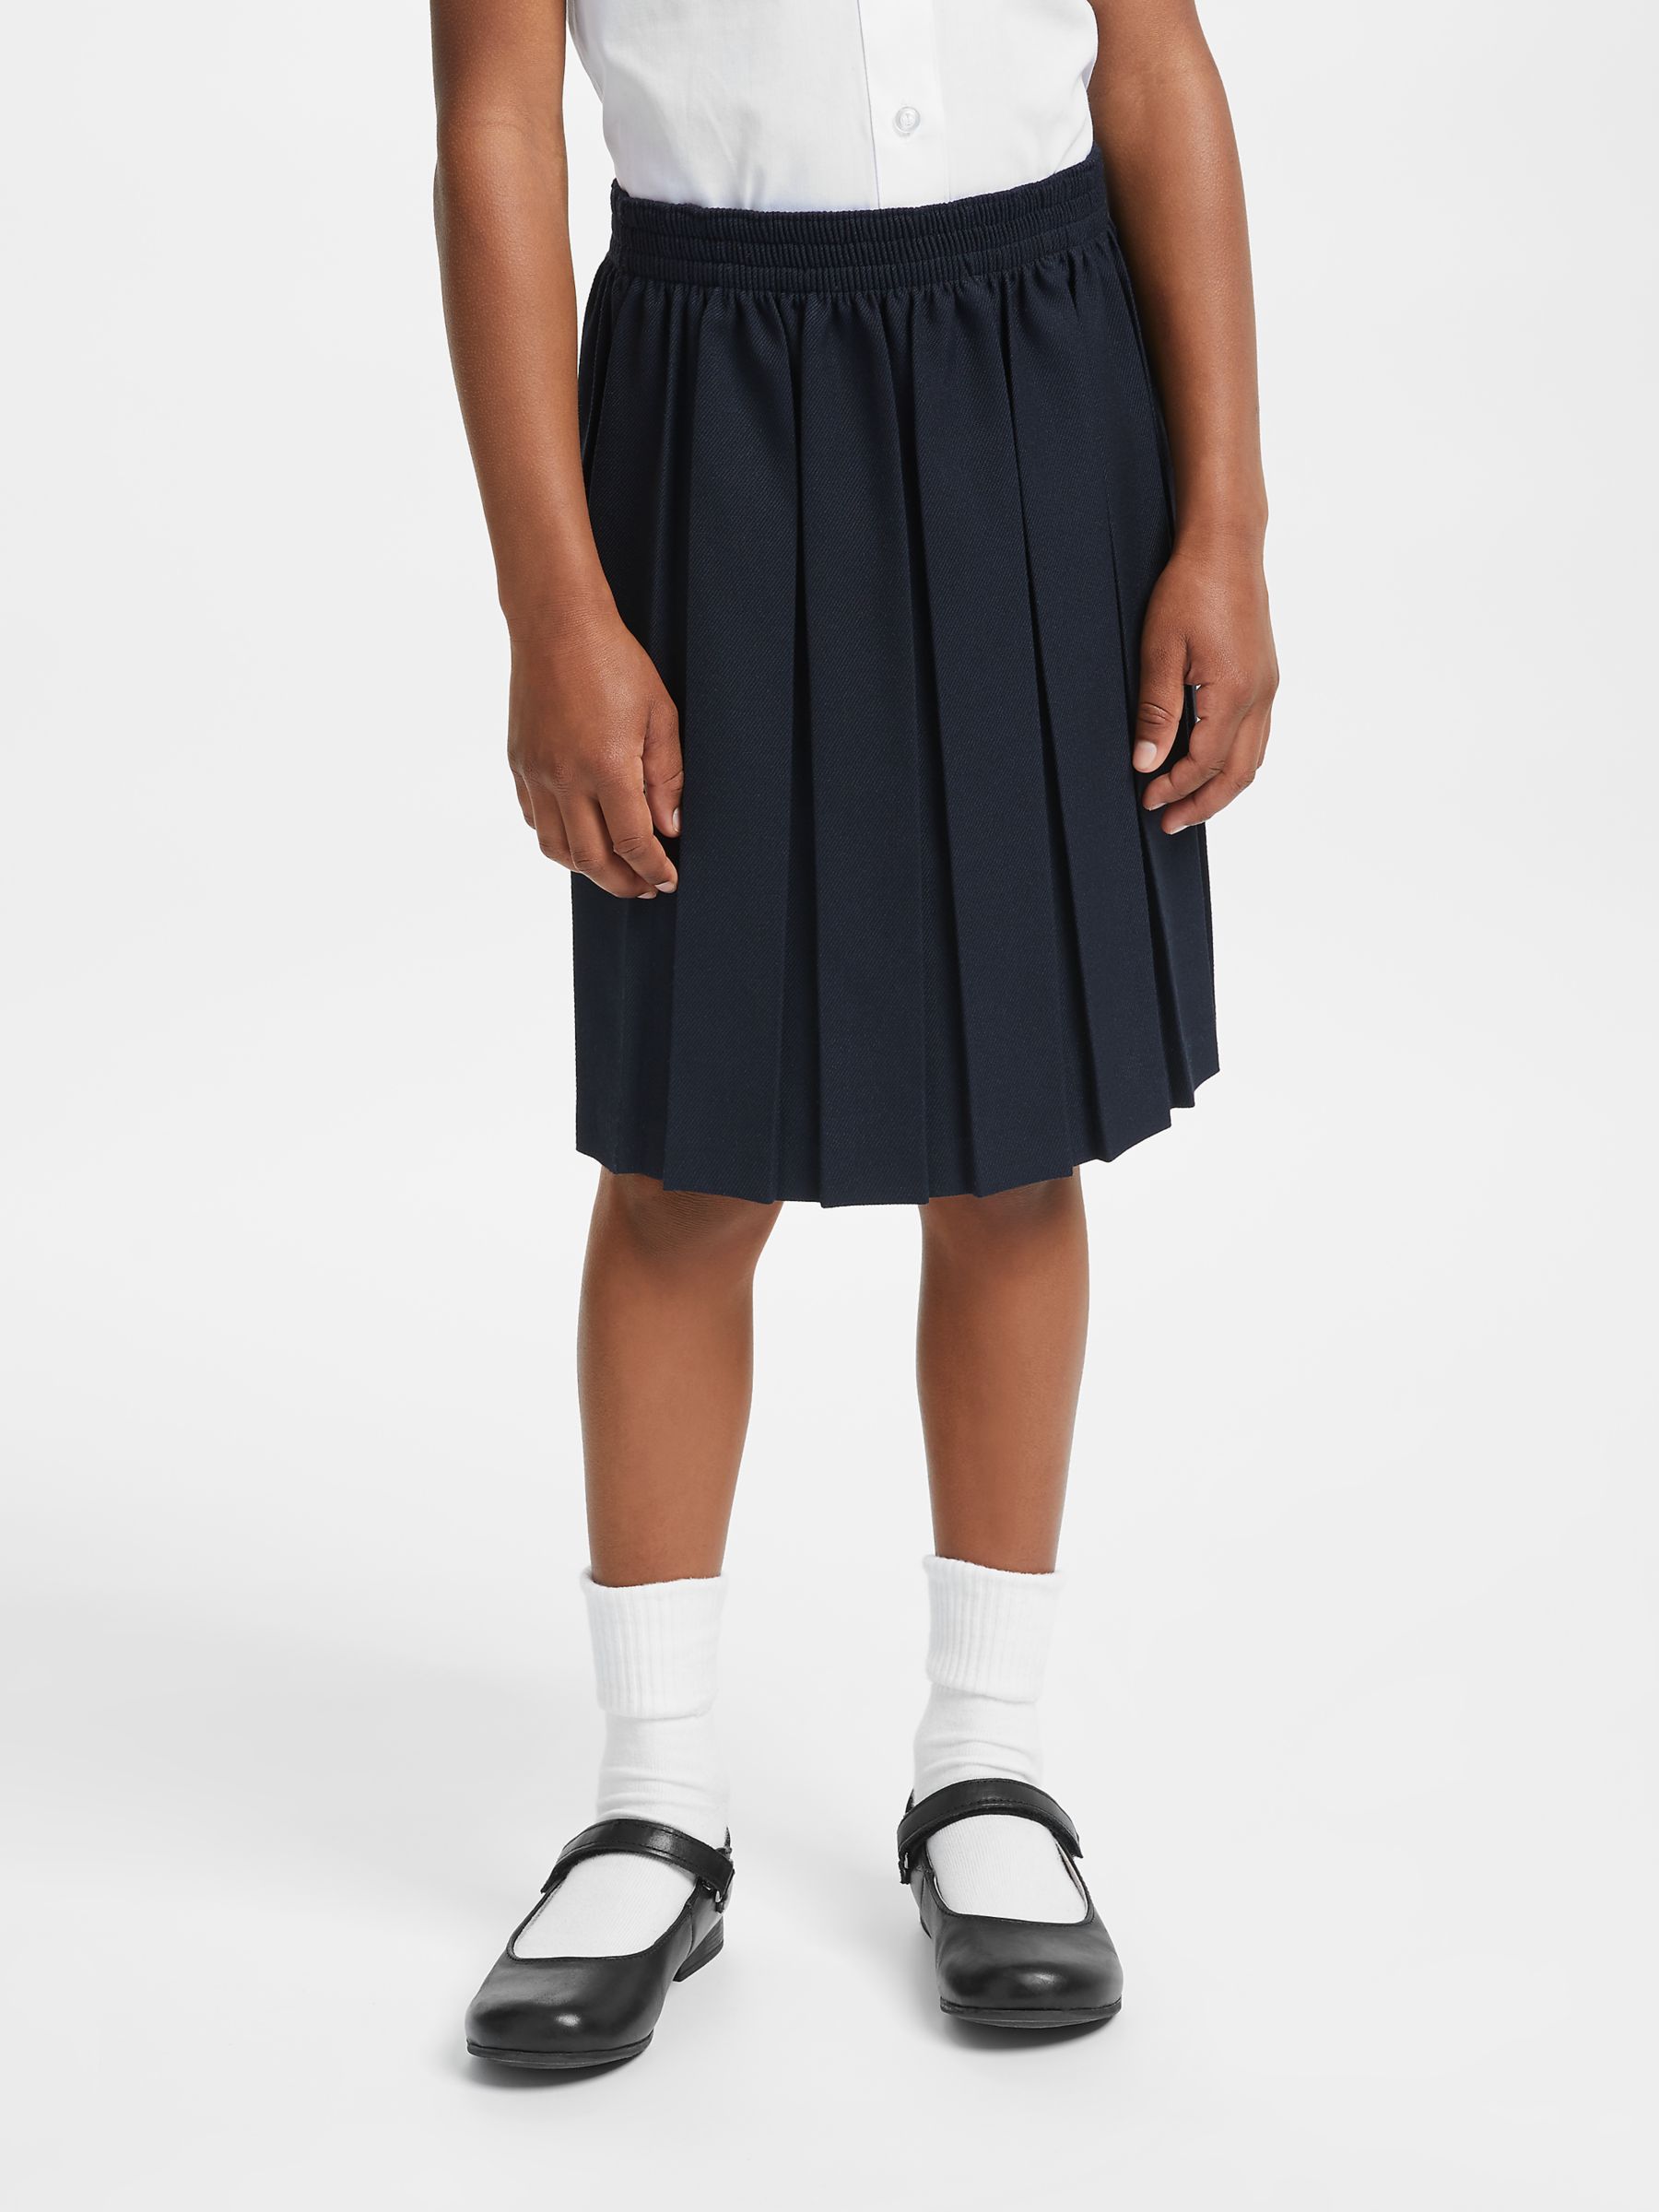 John Lewis And Partners Girls Stain Resistant Pleated School Skirt At John Lewis And Partners 